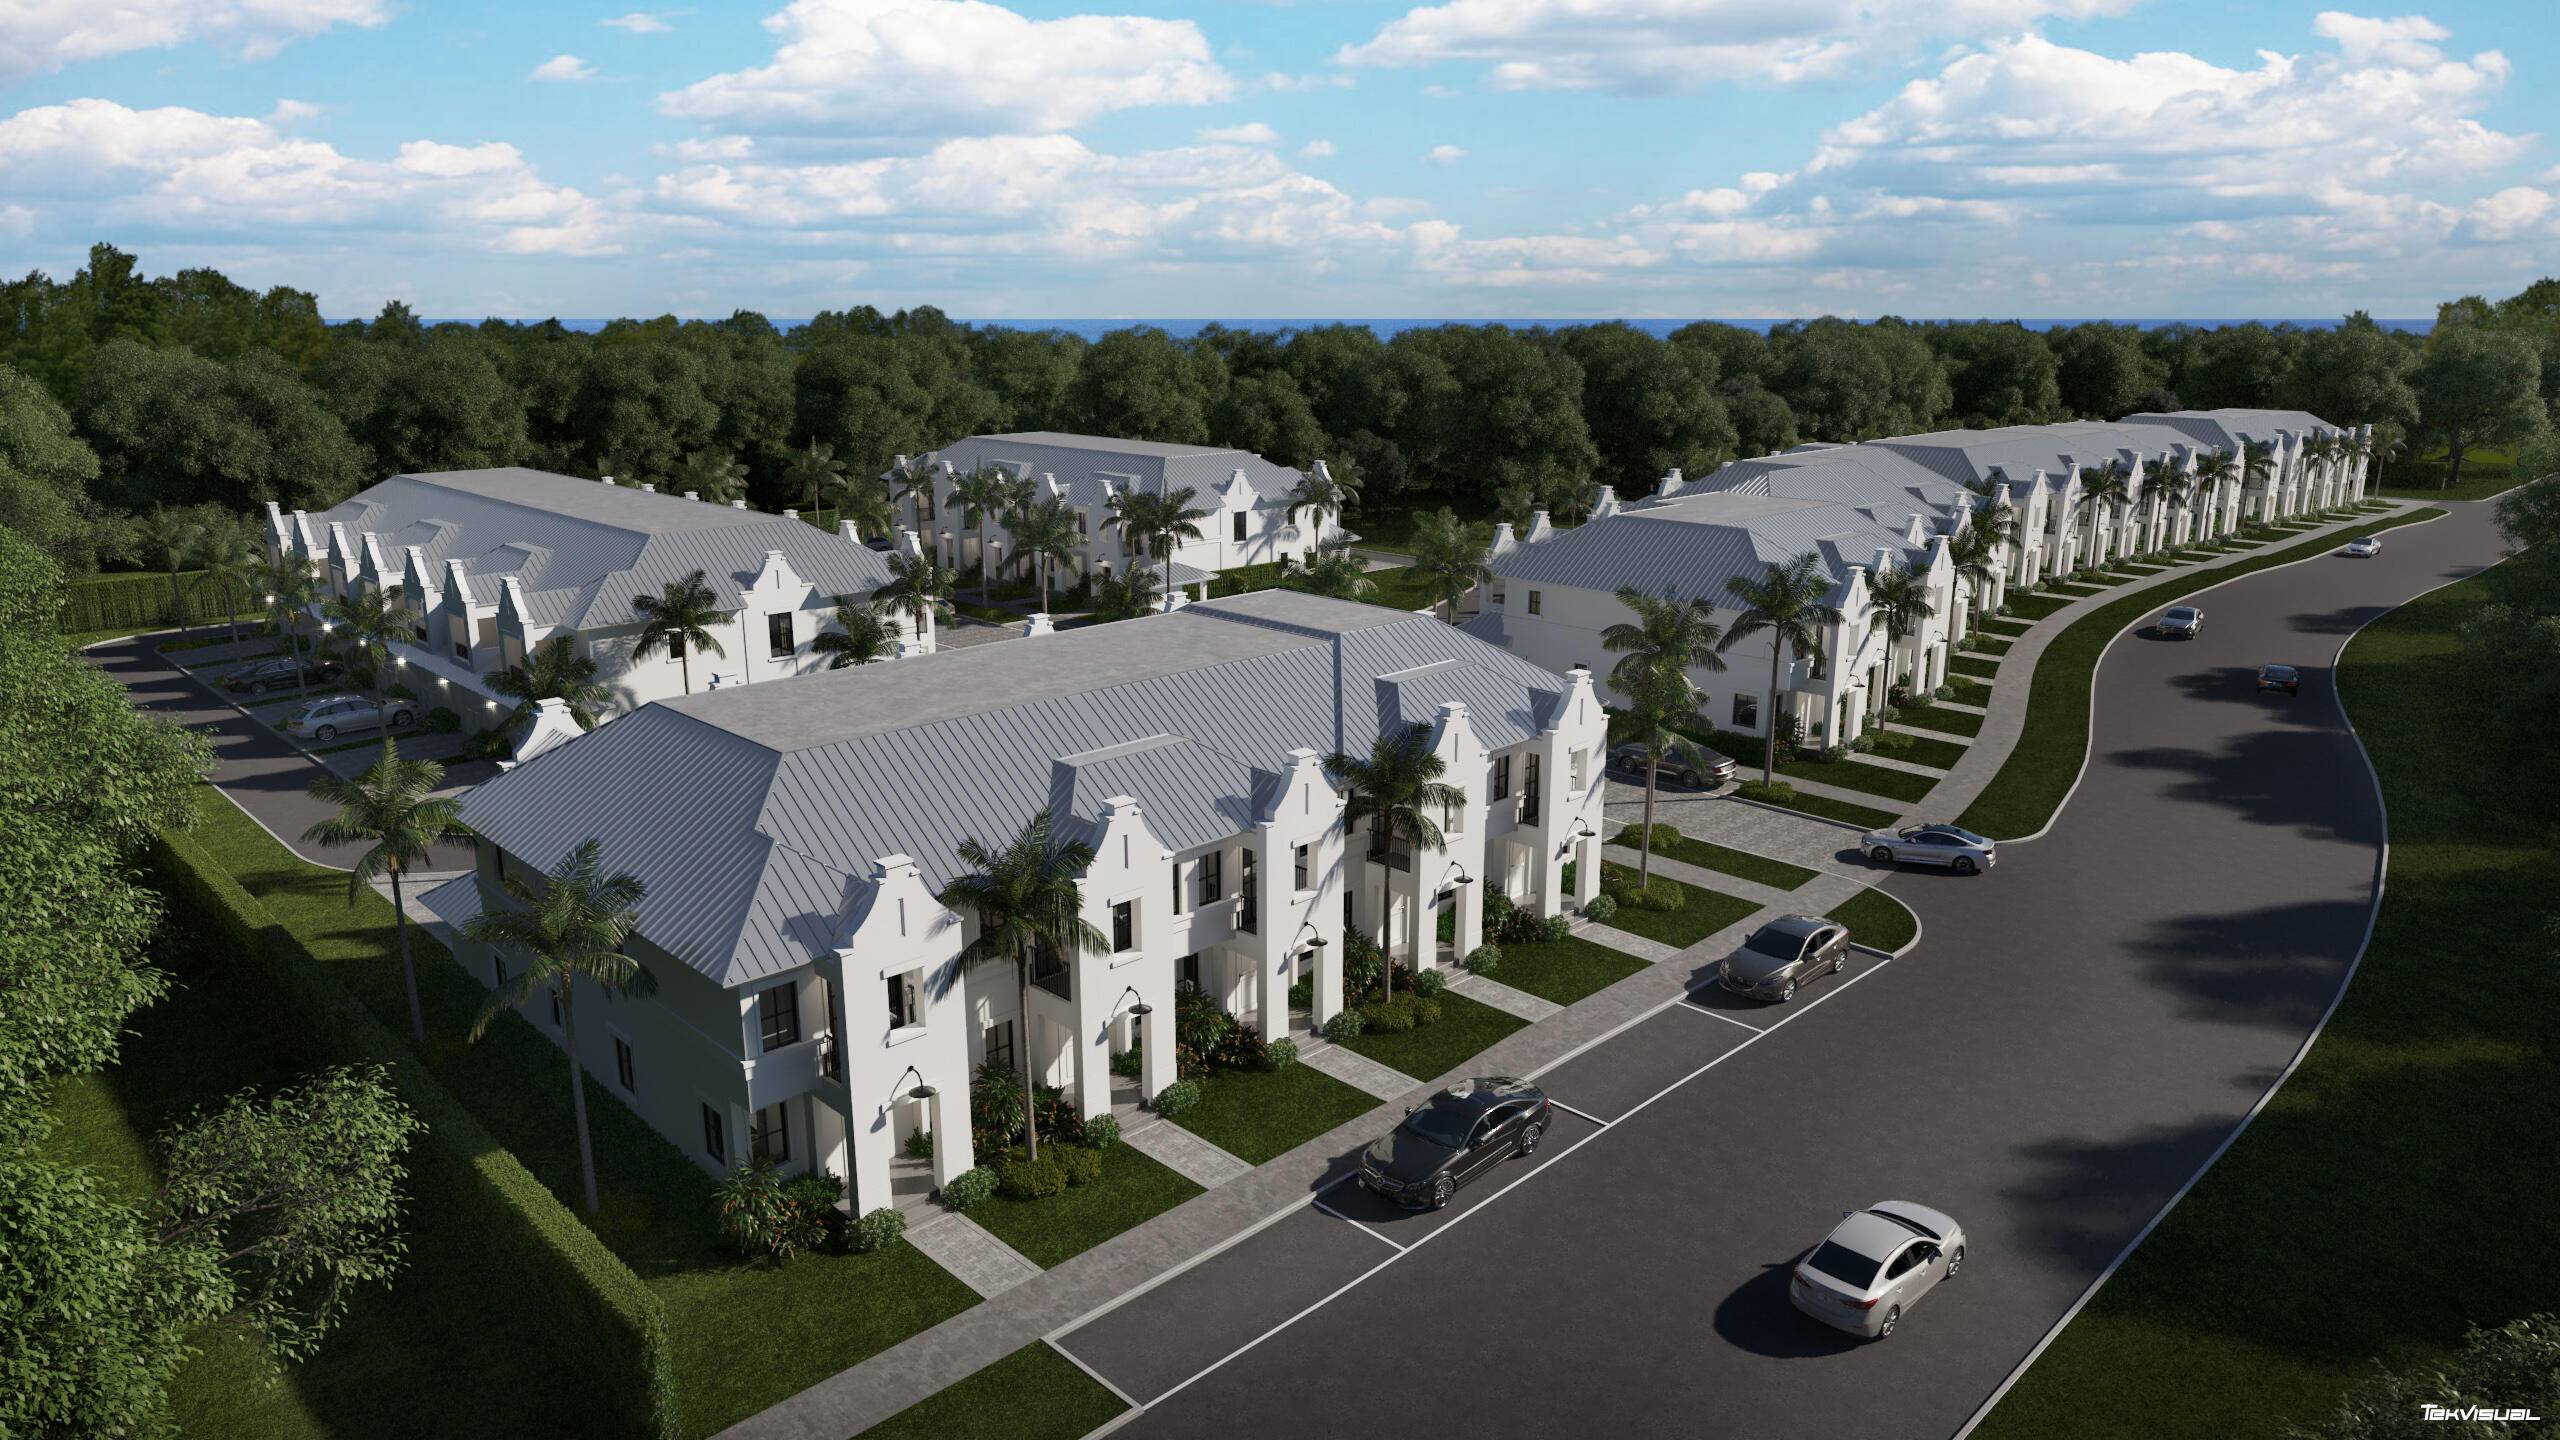 38 individual townhomes priced at 899, 000 end units 849, 000 interior units.